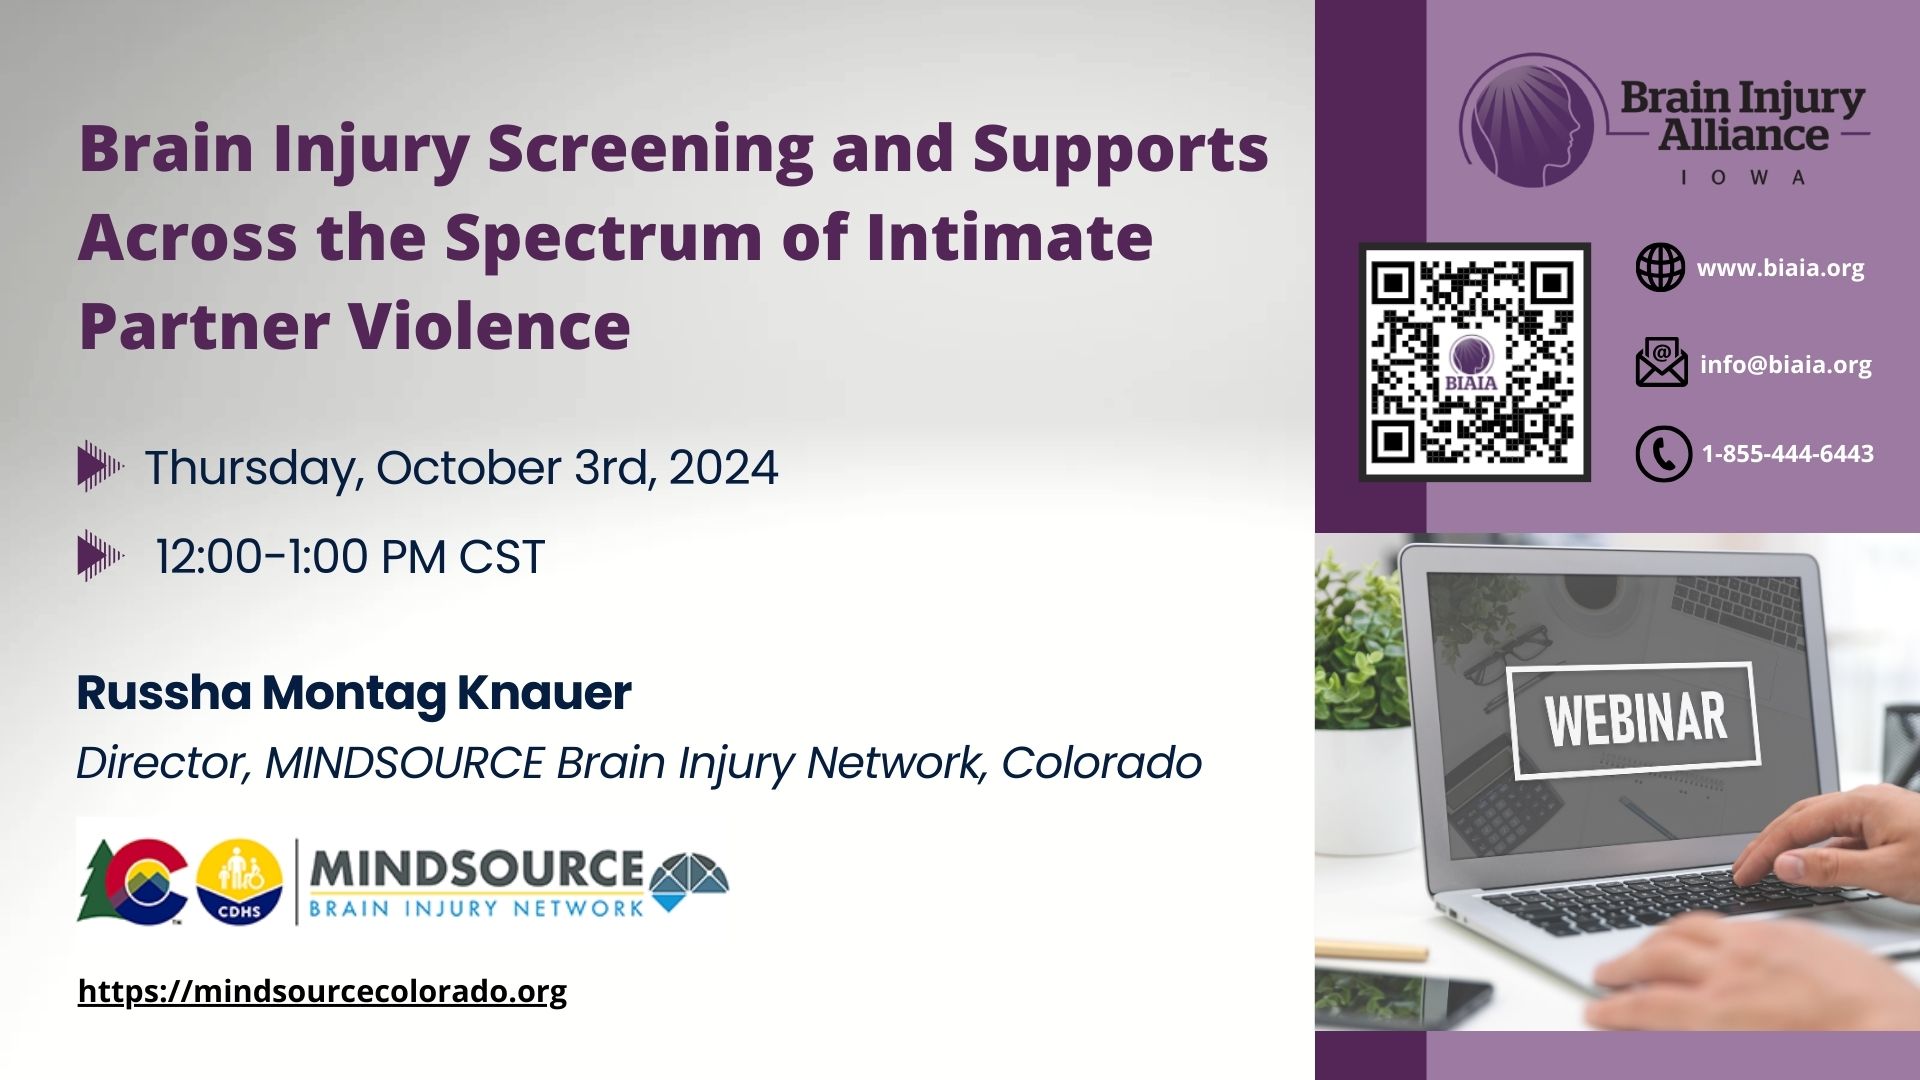 Brain Injury Screening and Supports Across the Spectrum of Intimate Partner Violence